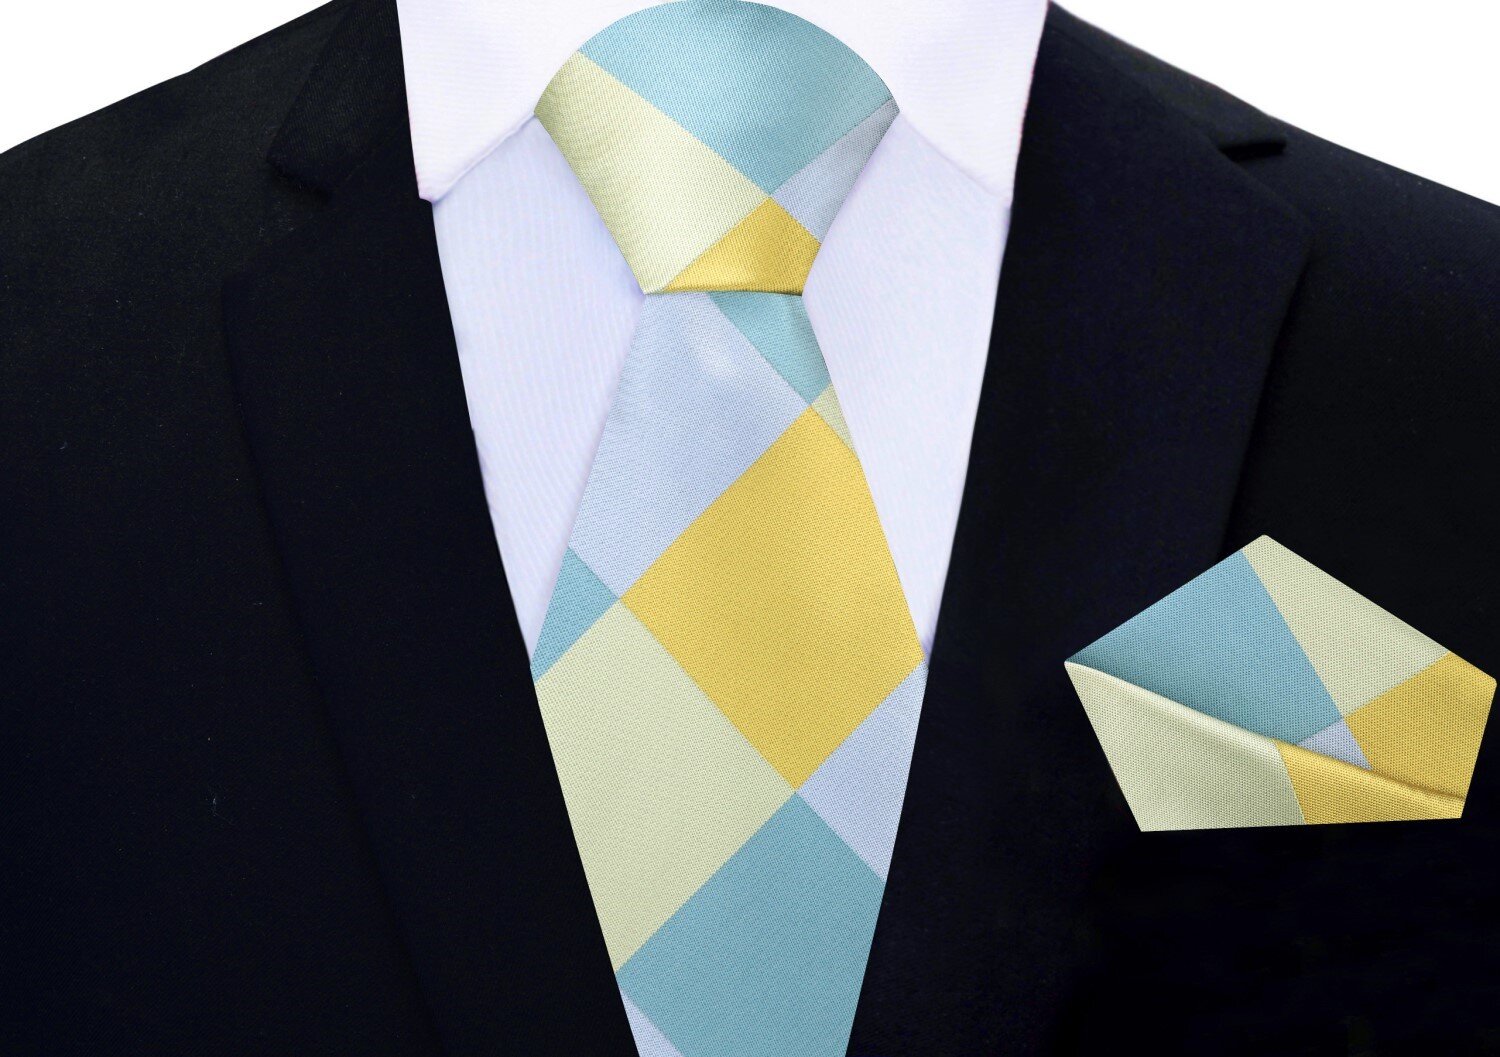 Main View: Yellow, Light Blue, Pale Green, Blue/Grey Large Diamond Tie and Pocket Square